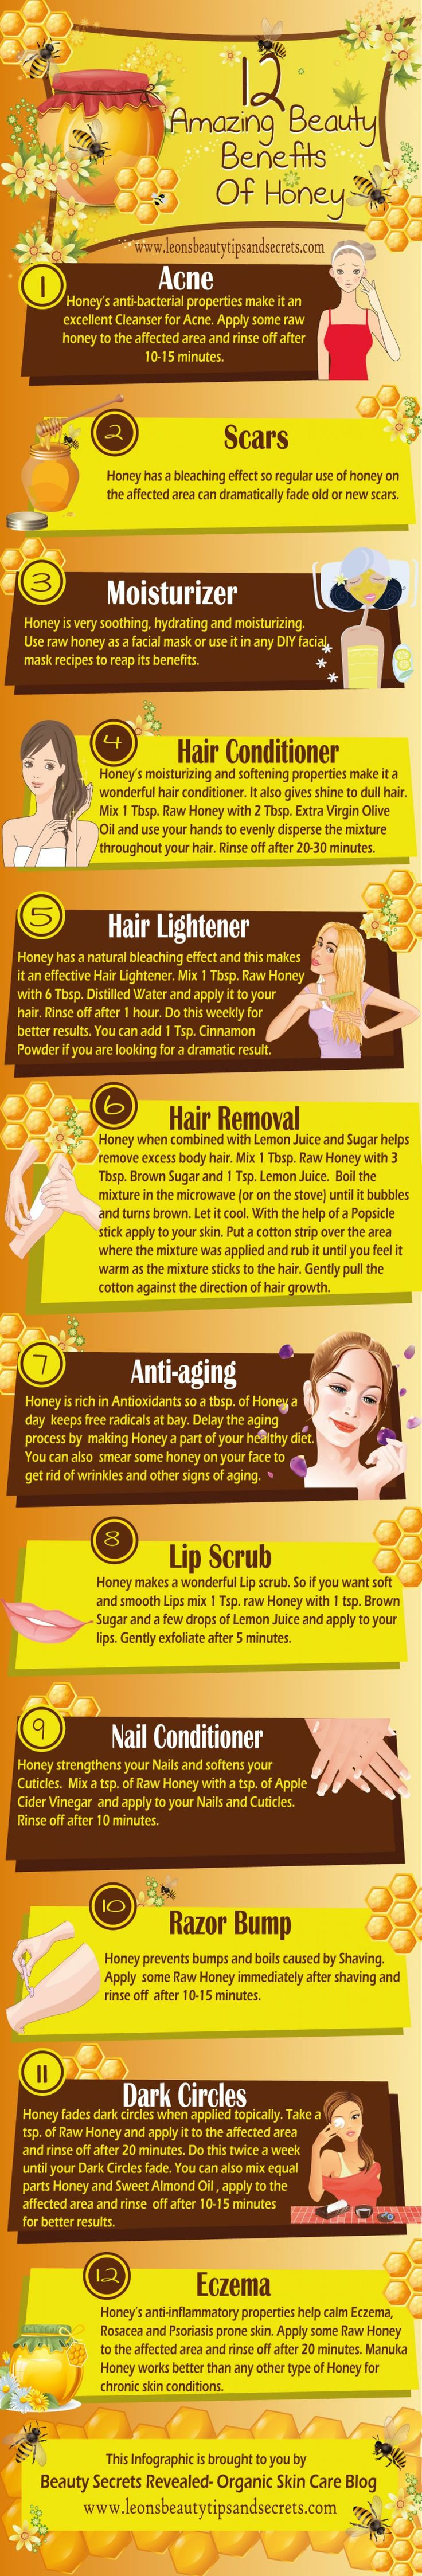 Facts and Amazing Benefits of Honey Infographic Benefits of Honey   51+ Amazing Health and Beauty Benefits [Infographic + Text]